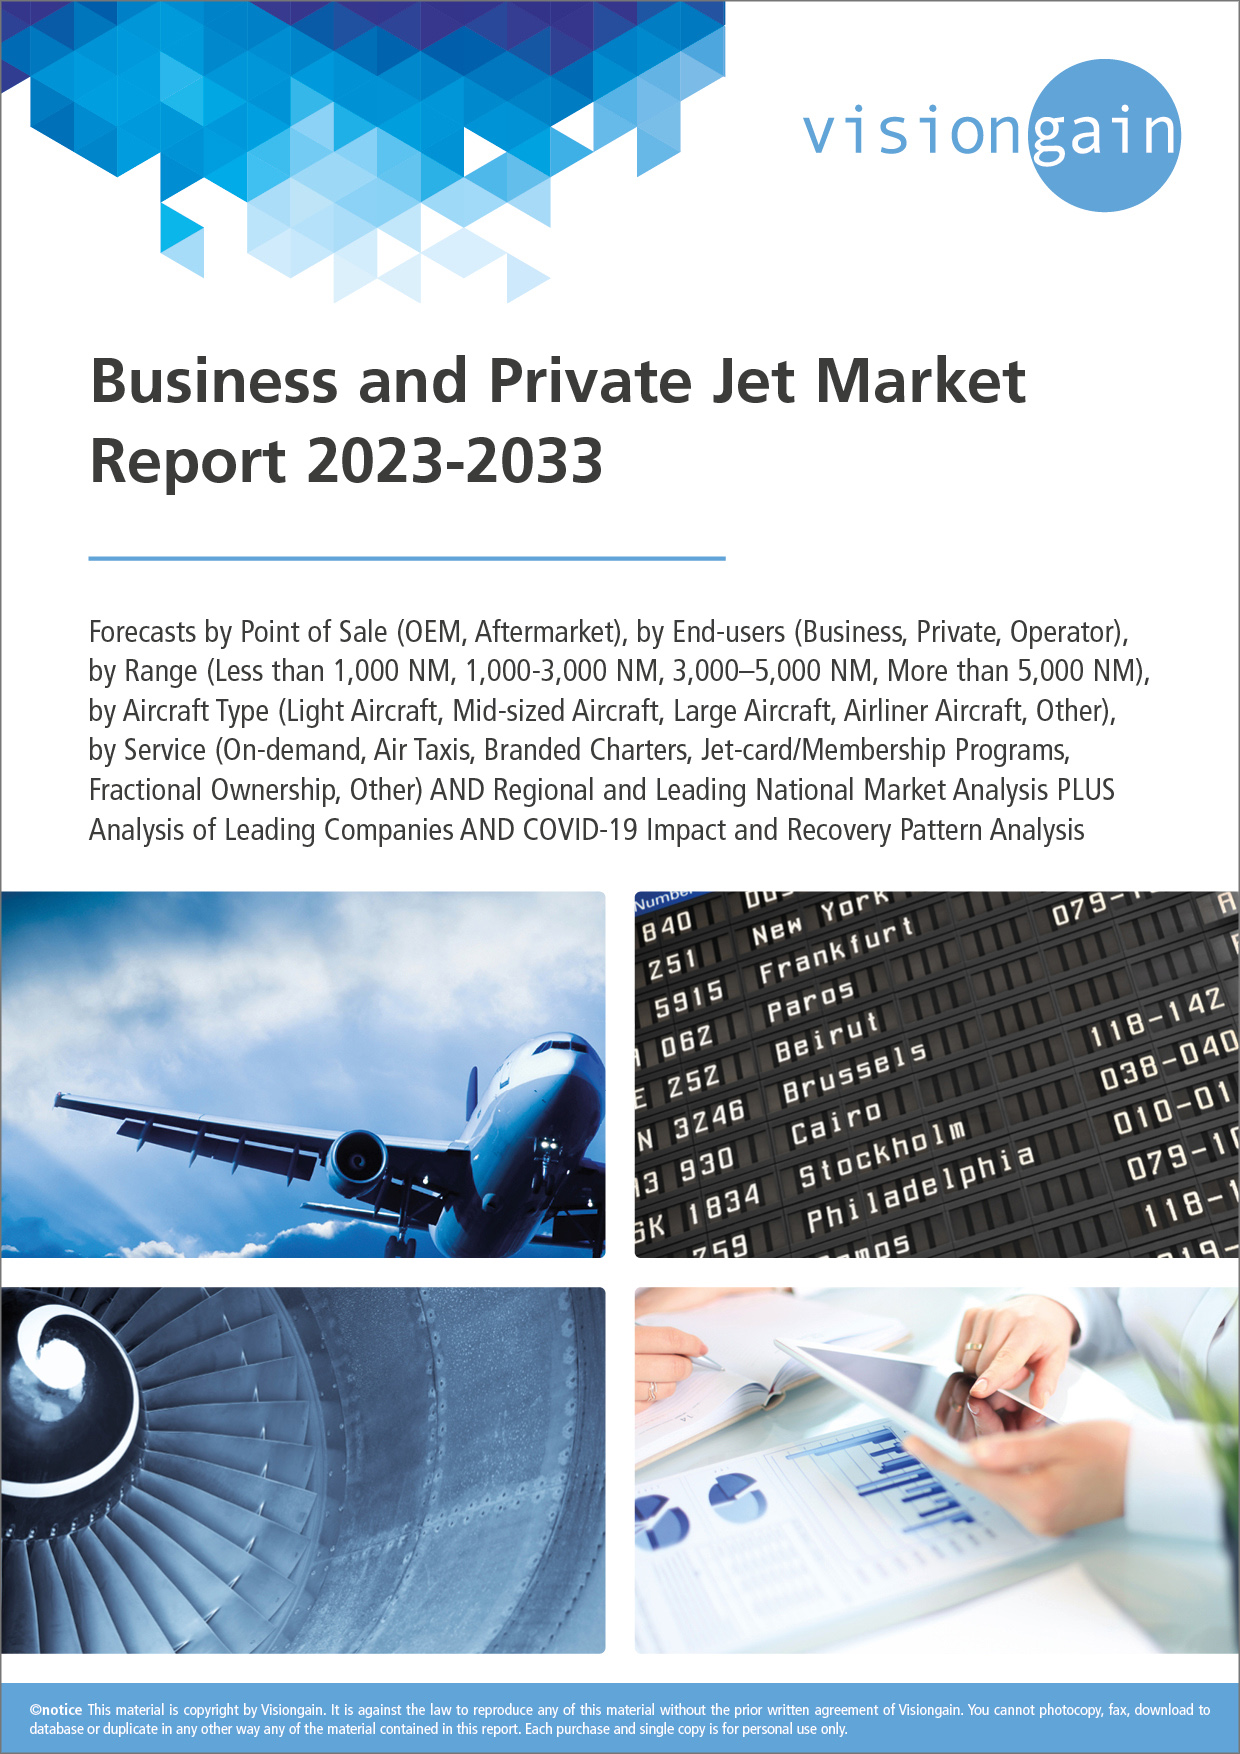 Business and Private Jet Market Report 2023-2033